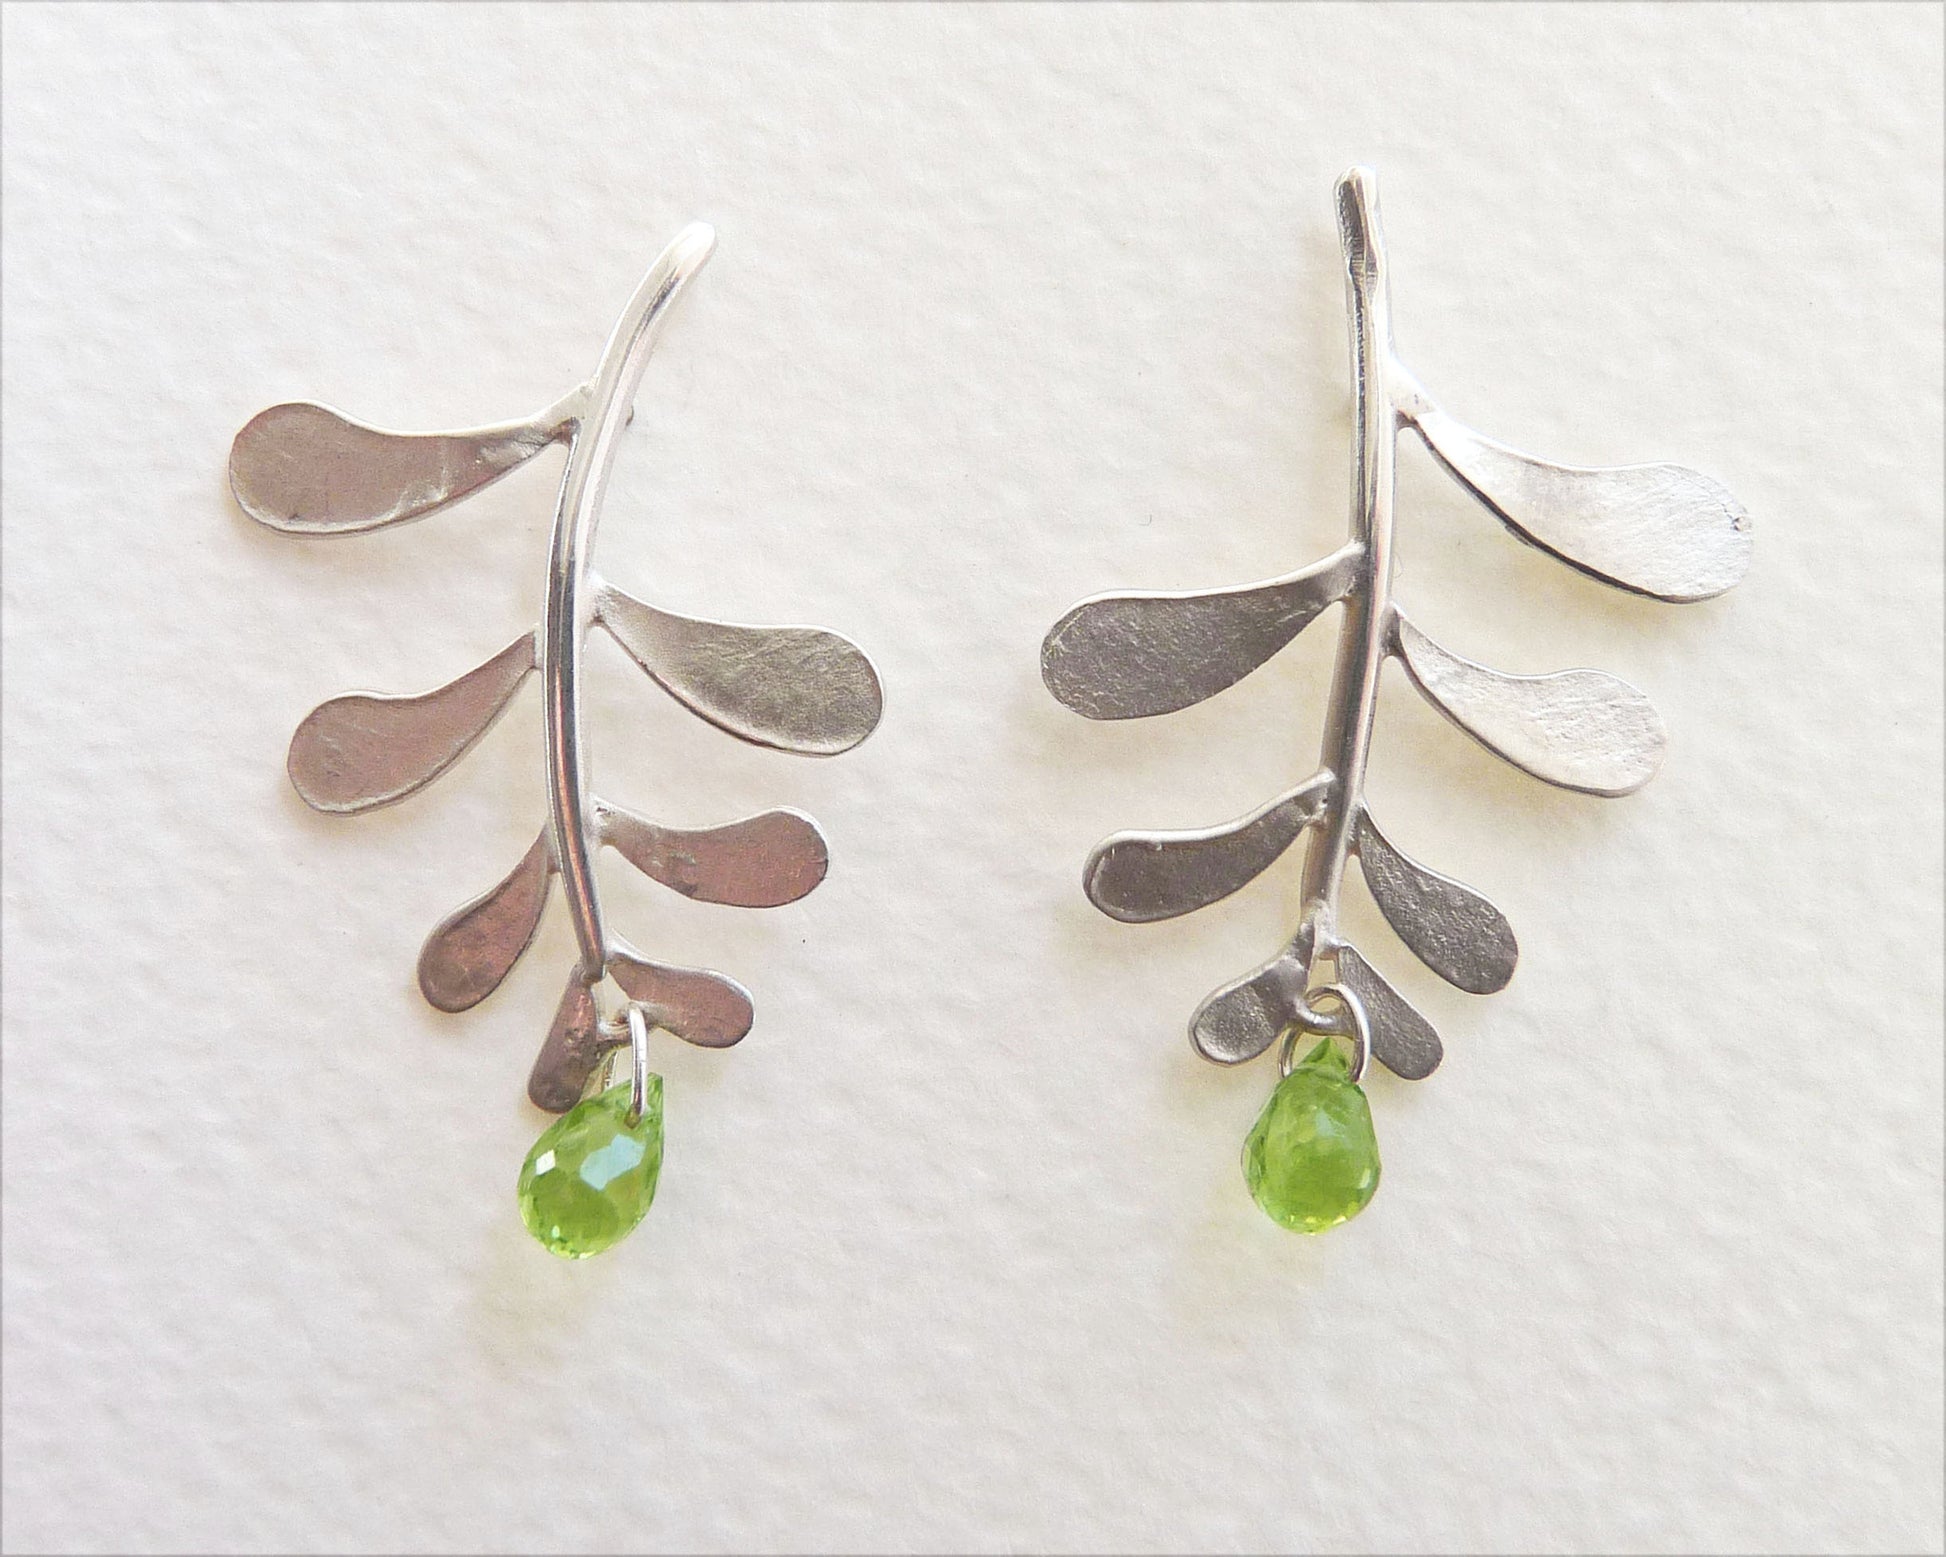 Blossoming, branch, jewellery, jewelry, earrings, studs, sterling, silver, nature, natural, chrysoprase, garnet, peridot